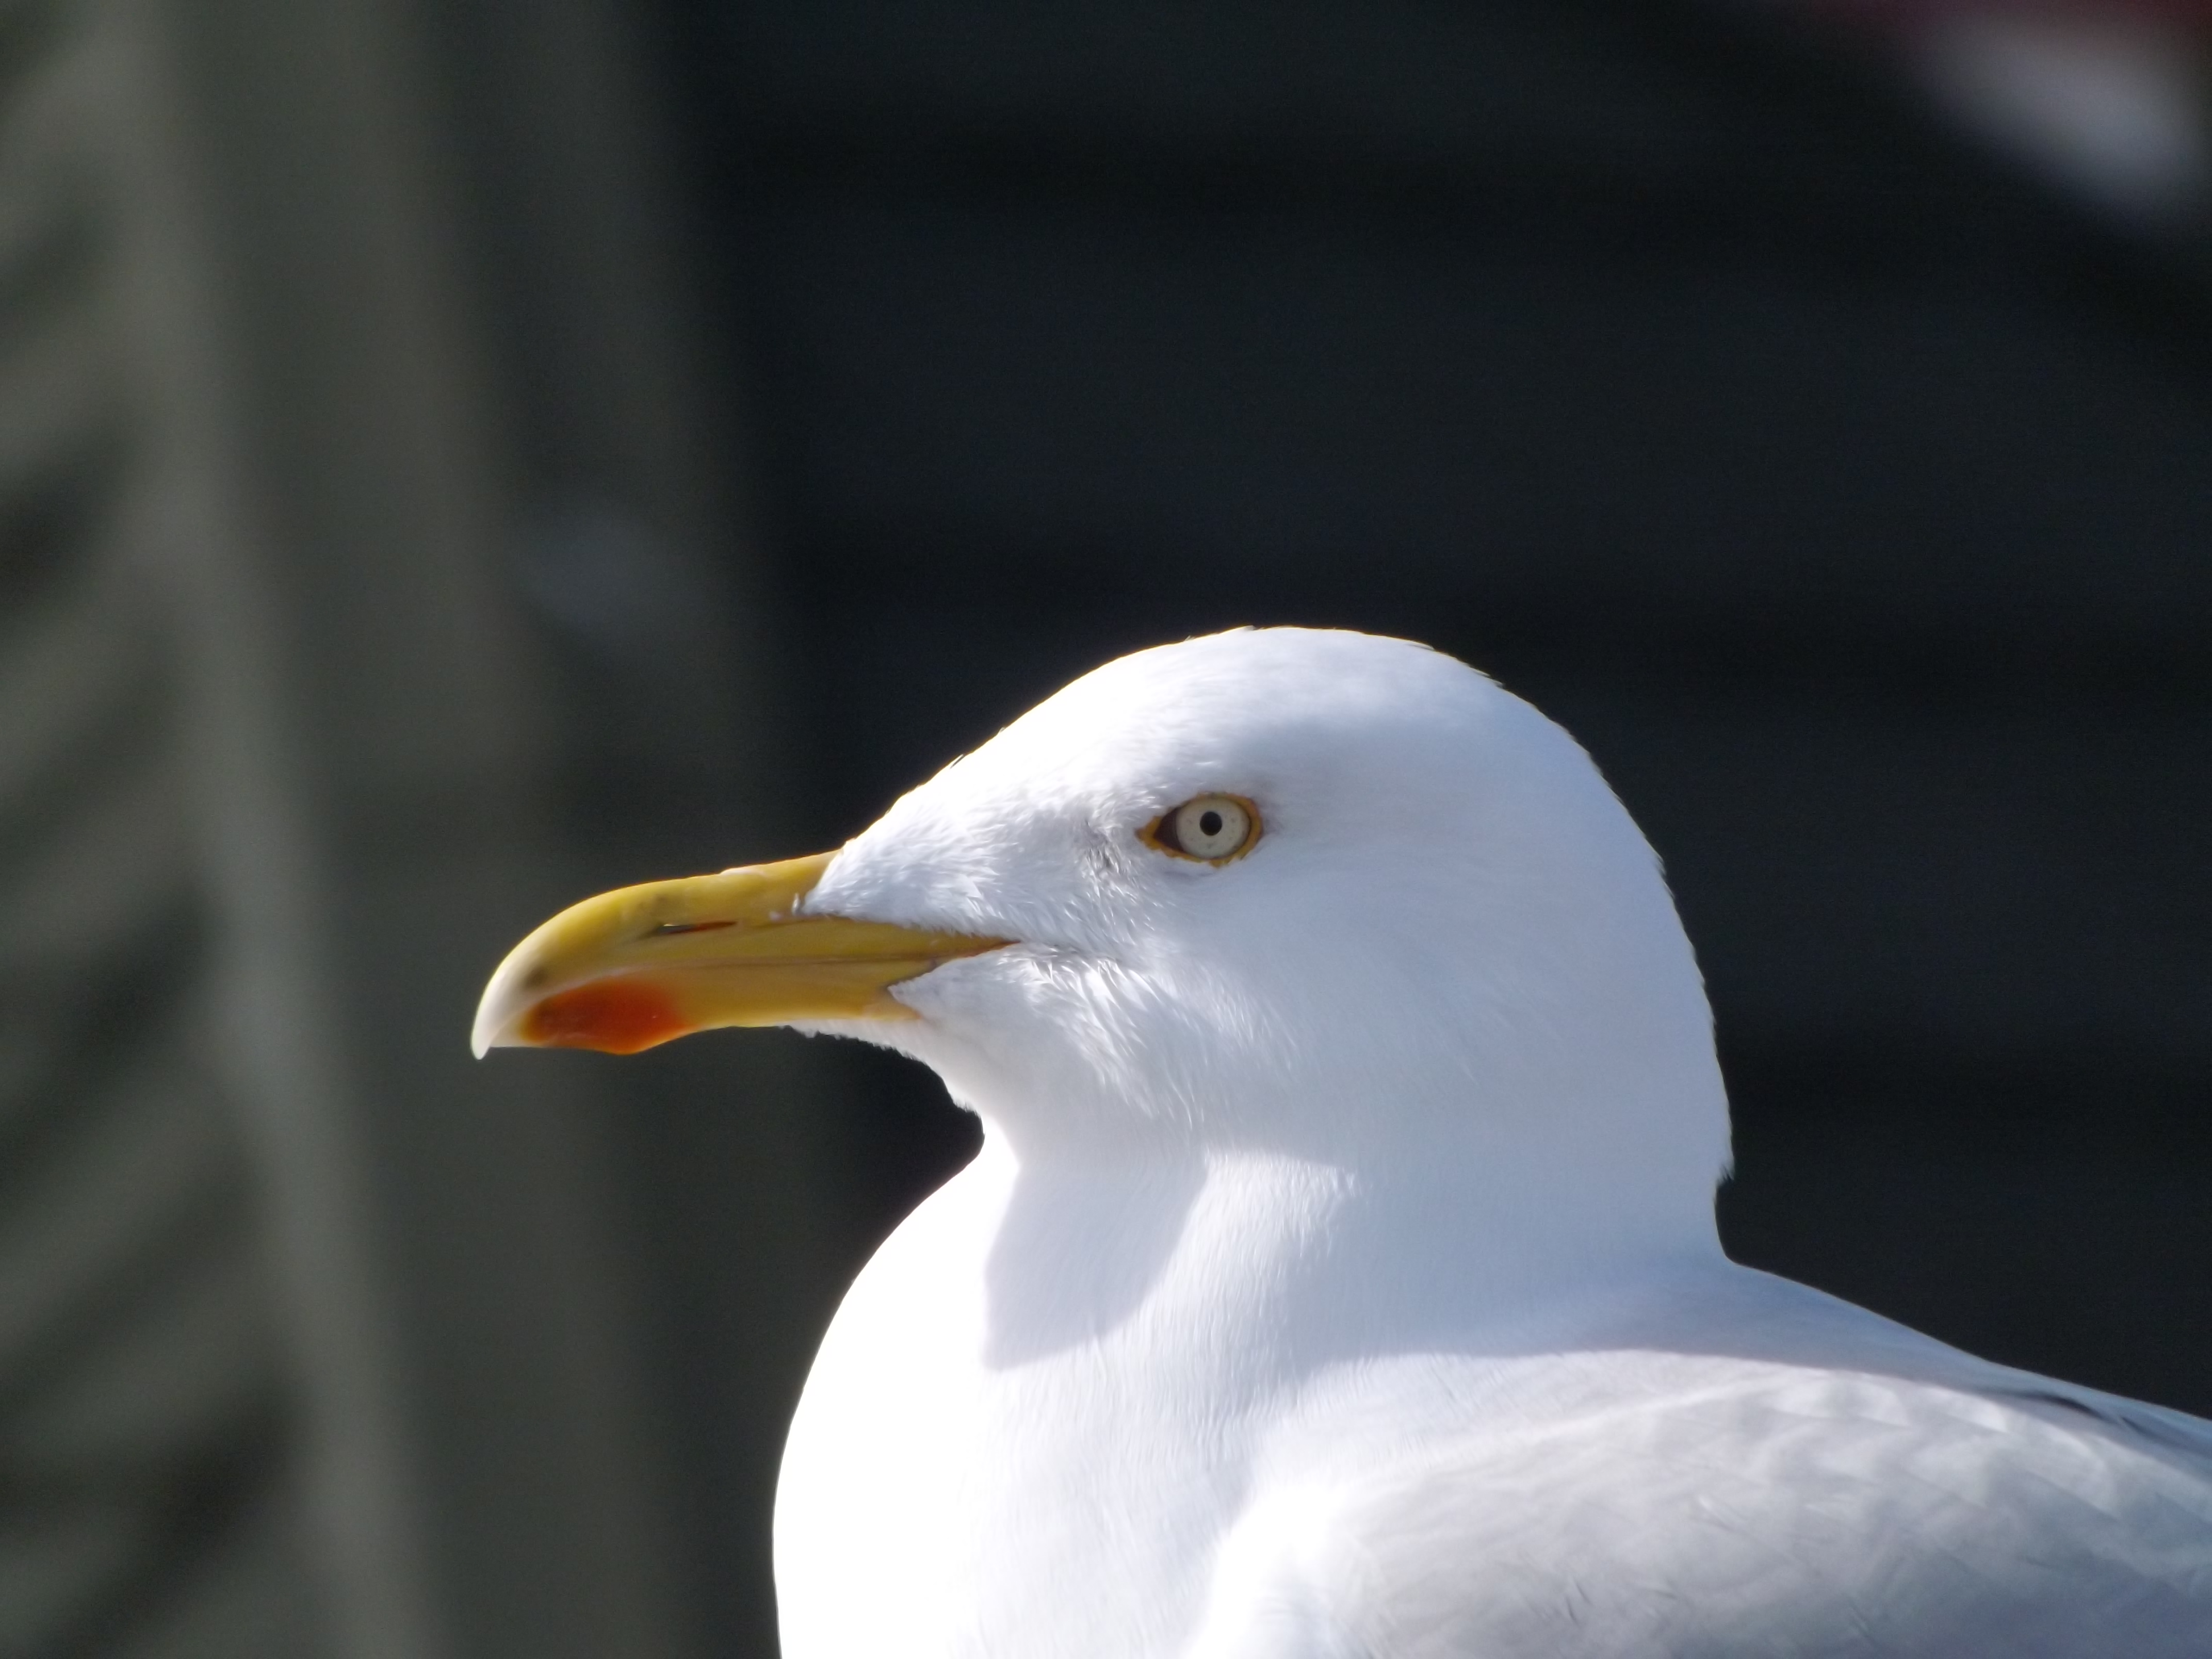 Malcolm - The Seagull (Closeup) by J-Jewfro on DeviantArt